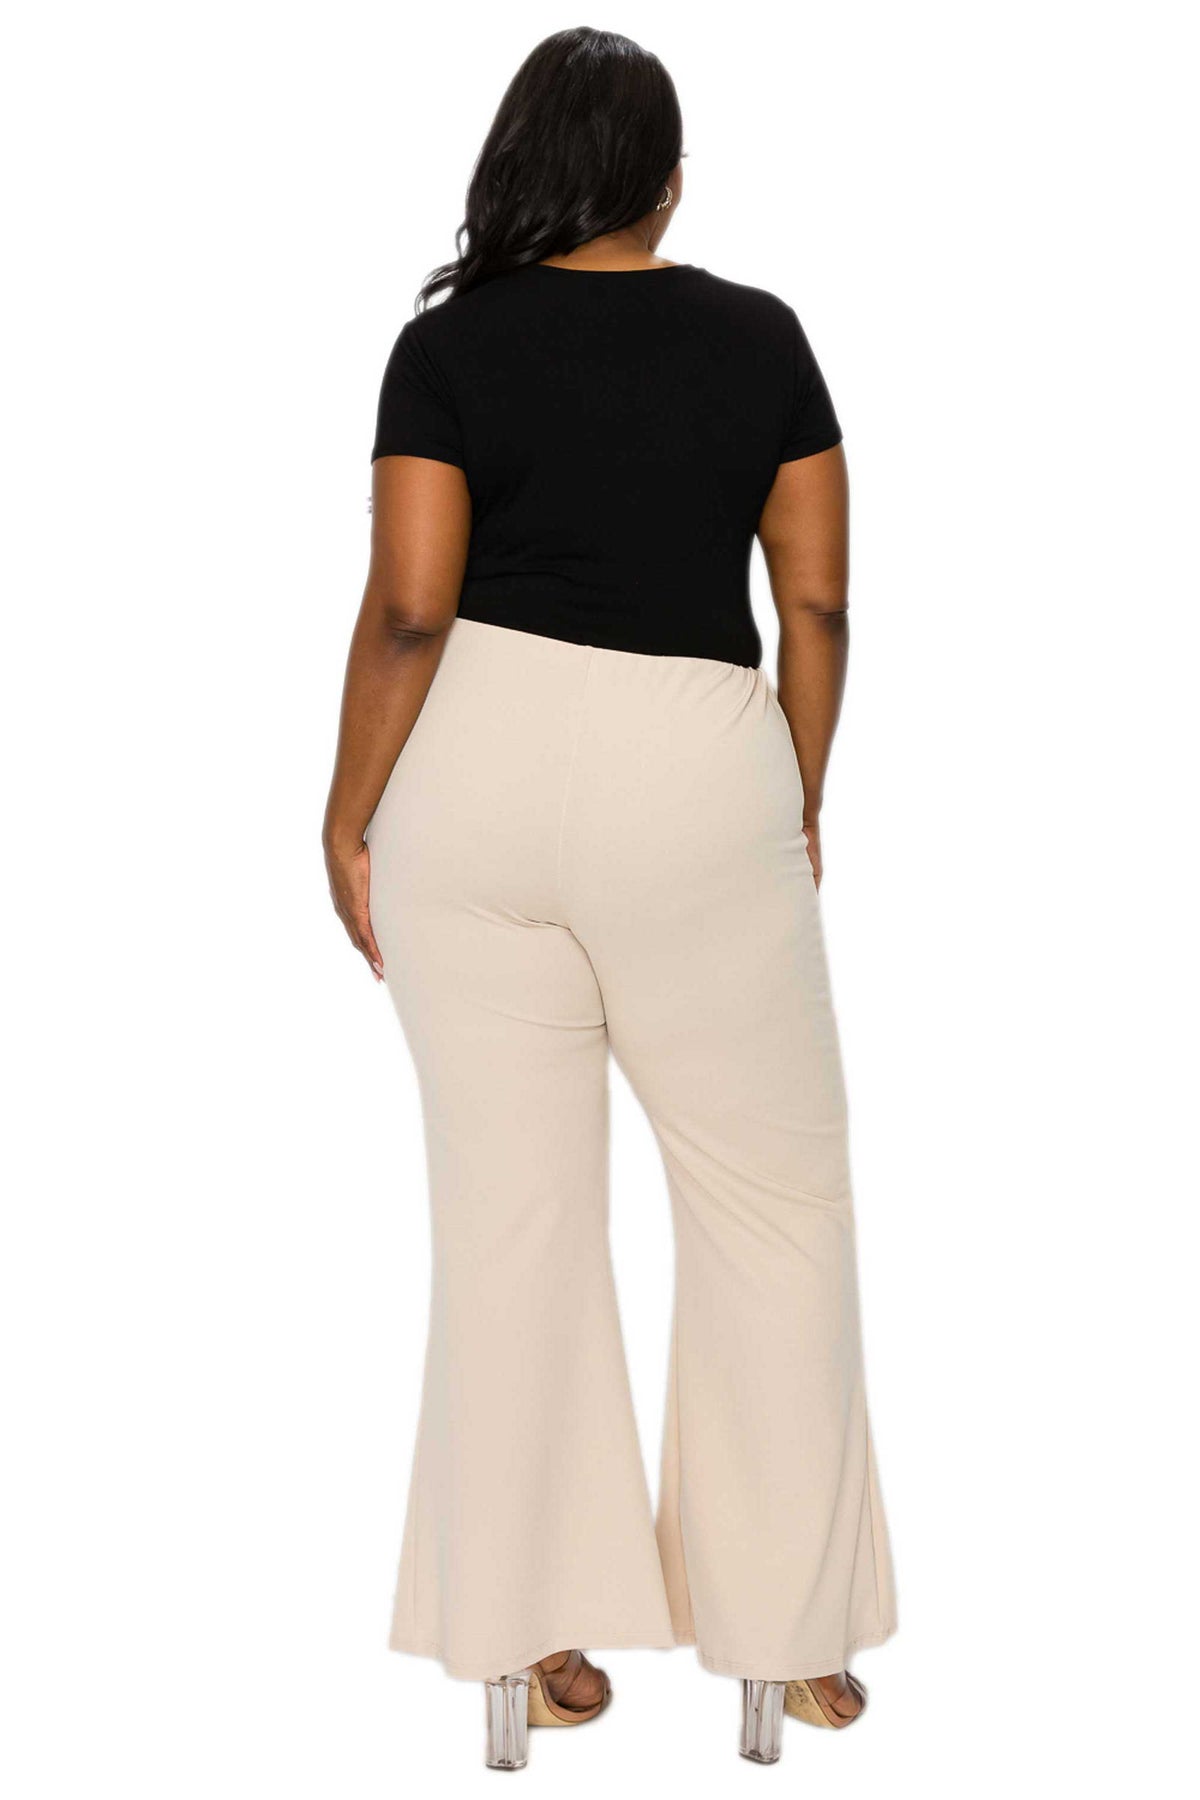 High Waisted Button Detail Flare Pants - L I V D